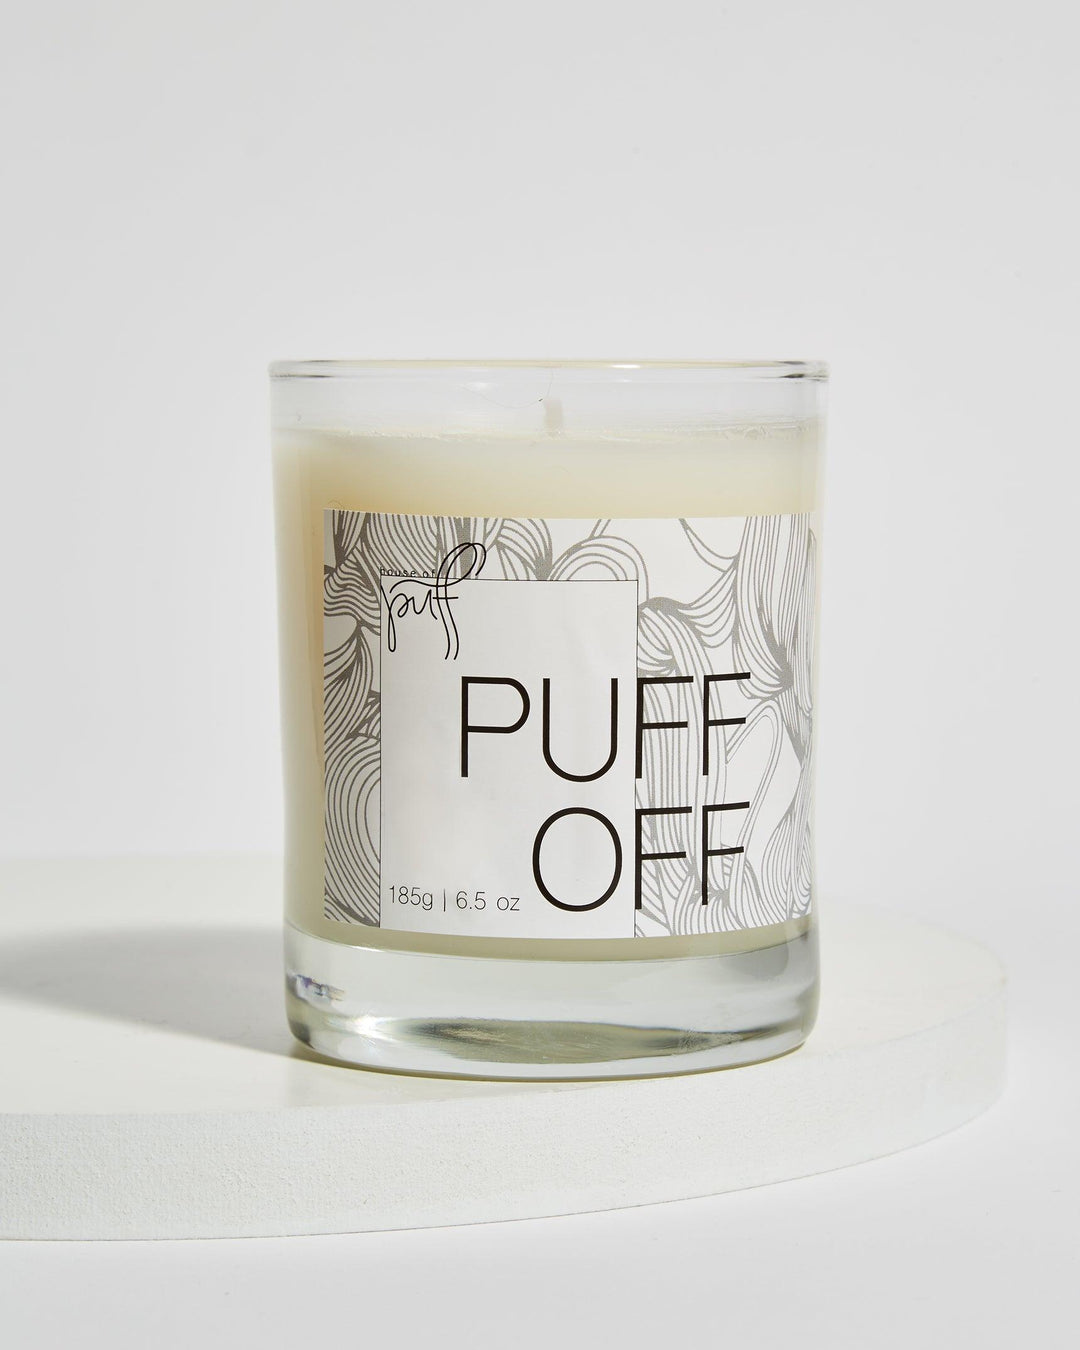 puff off cannabis scented candle